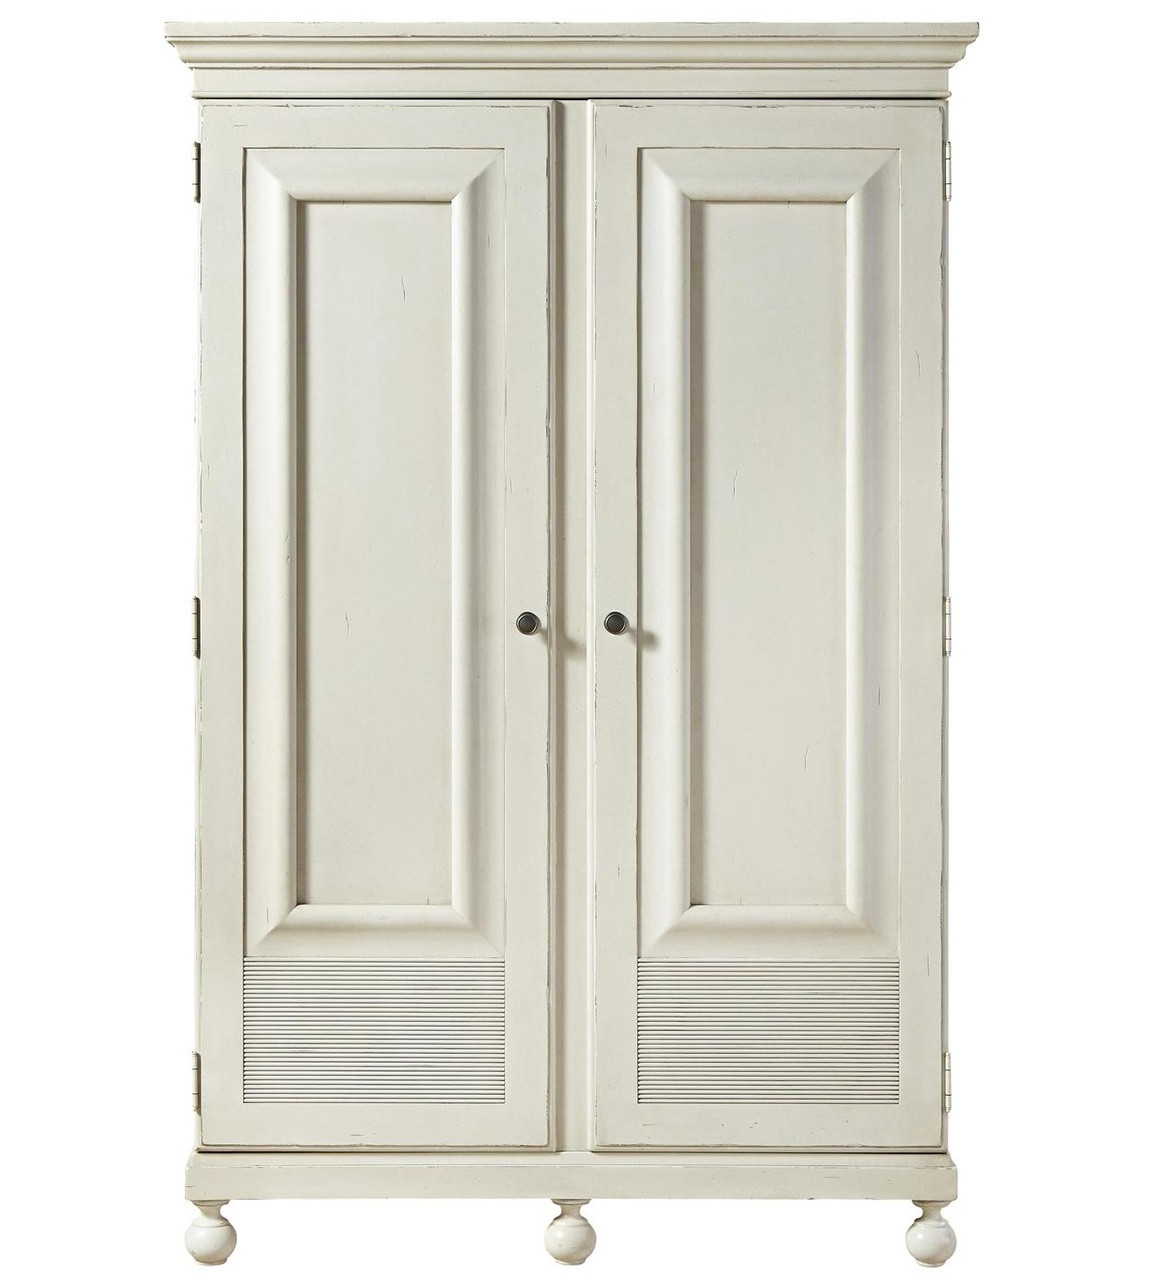 Sojourn French Country White Armoire Wardrobe Zin Home